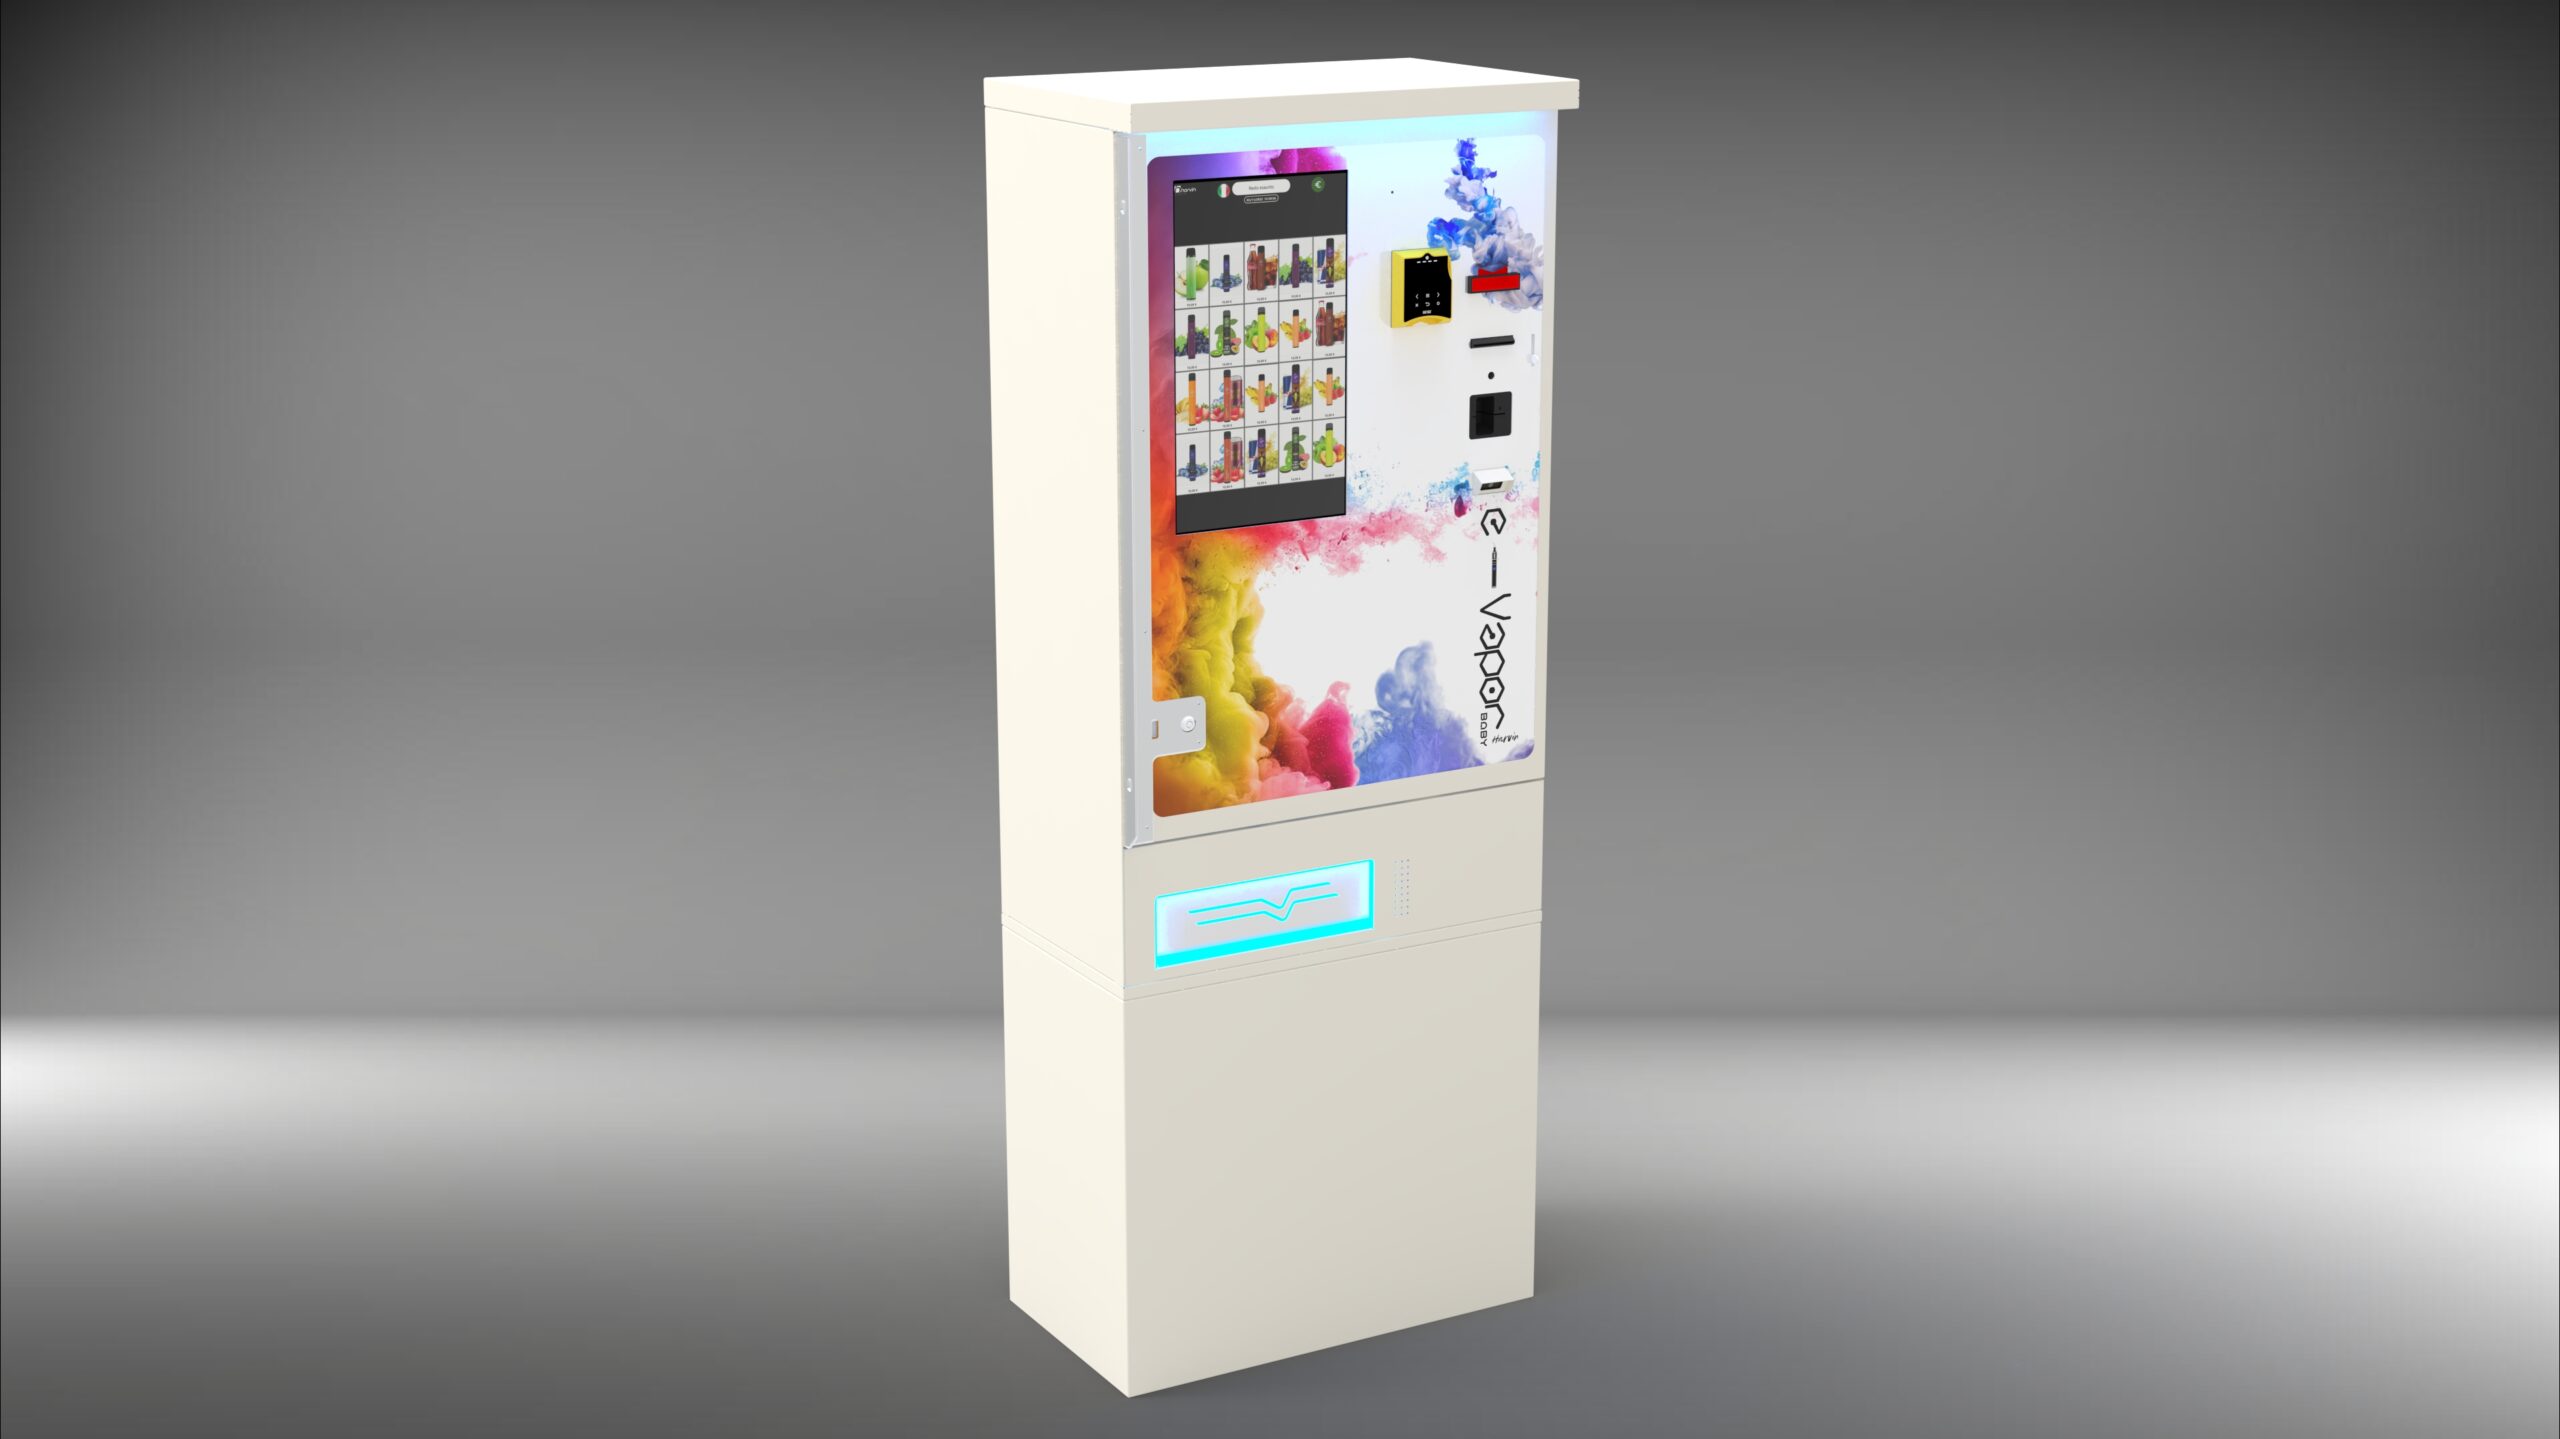 WHAT PRODUCTS SHOULD BE SOLD IN A LEGAL HEMP VENDING MACHINE?